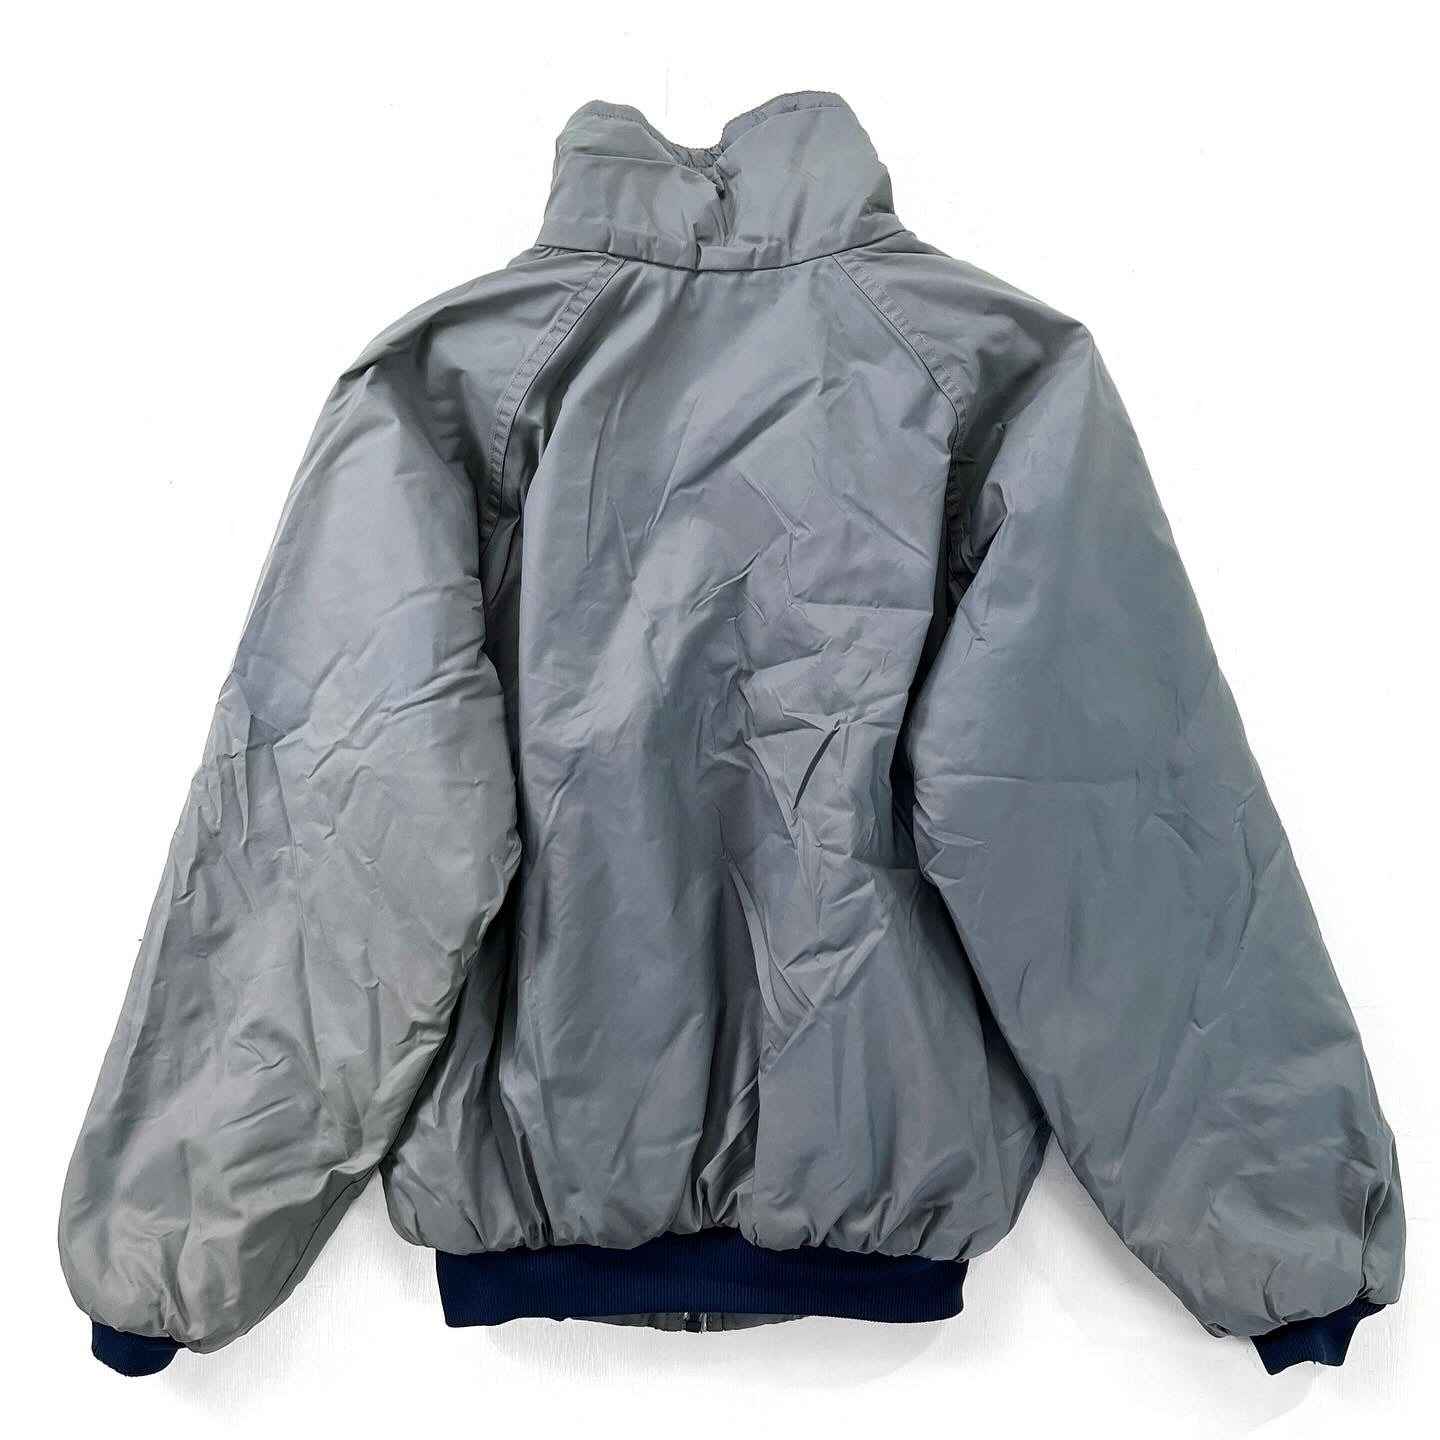 1982 Patagonia First Generation Shelled Pile Jacket, Grey & Navy (S)